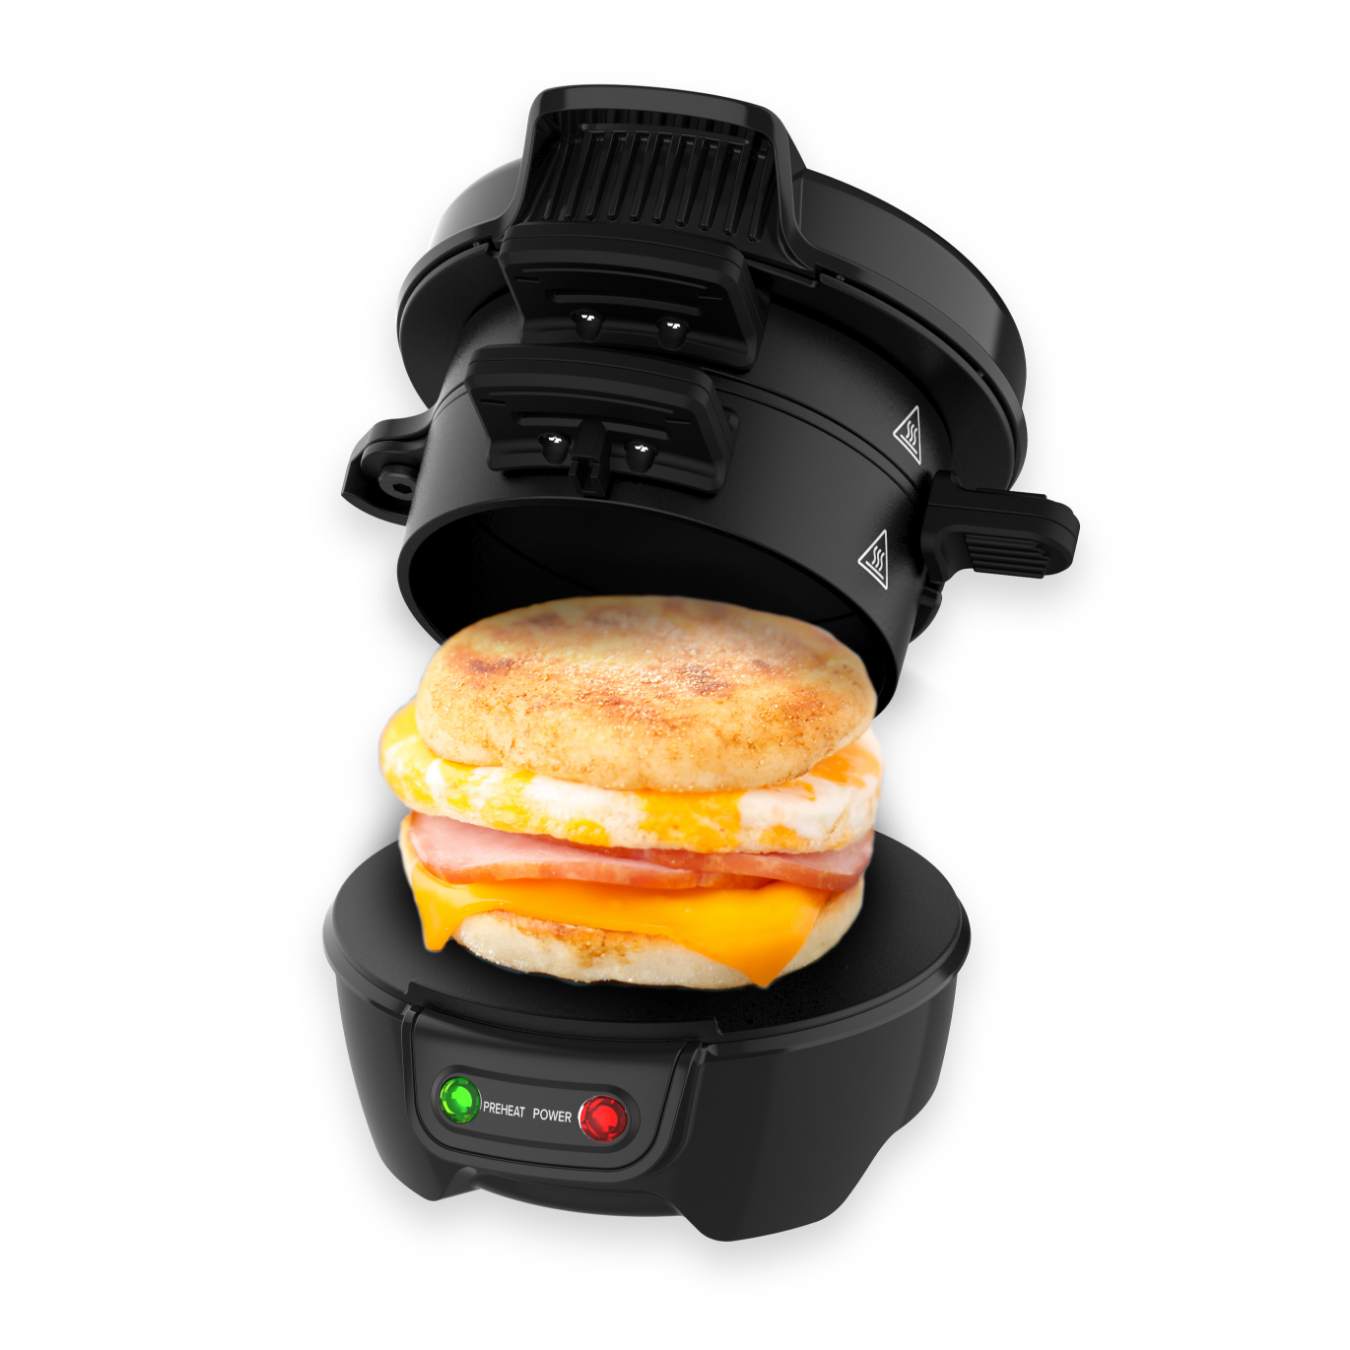 View Breakfast Sandwich Maker By DrewCole 3 Layer Cooking Create The Perfect Breakfast Muffin At Home High Street TV information